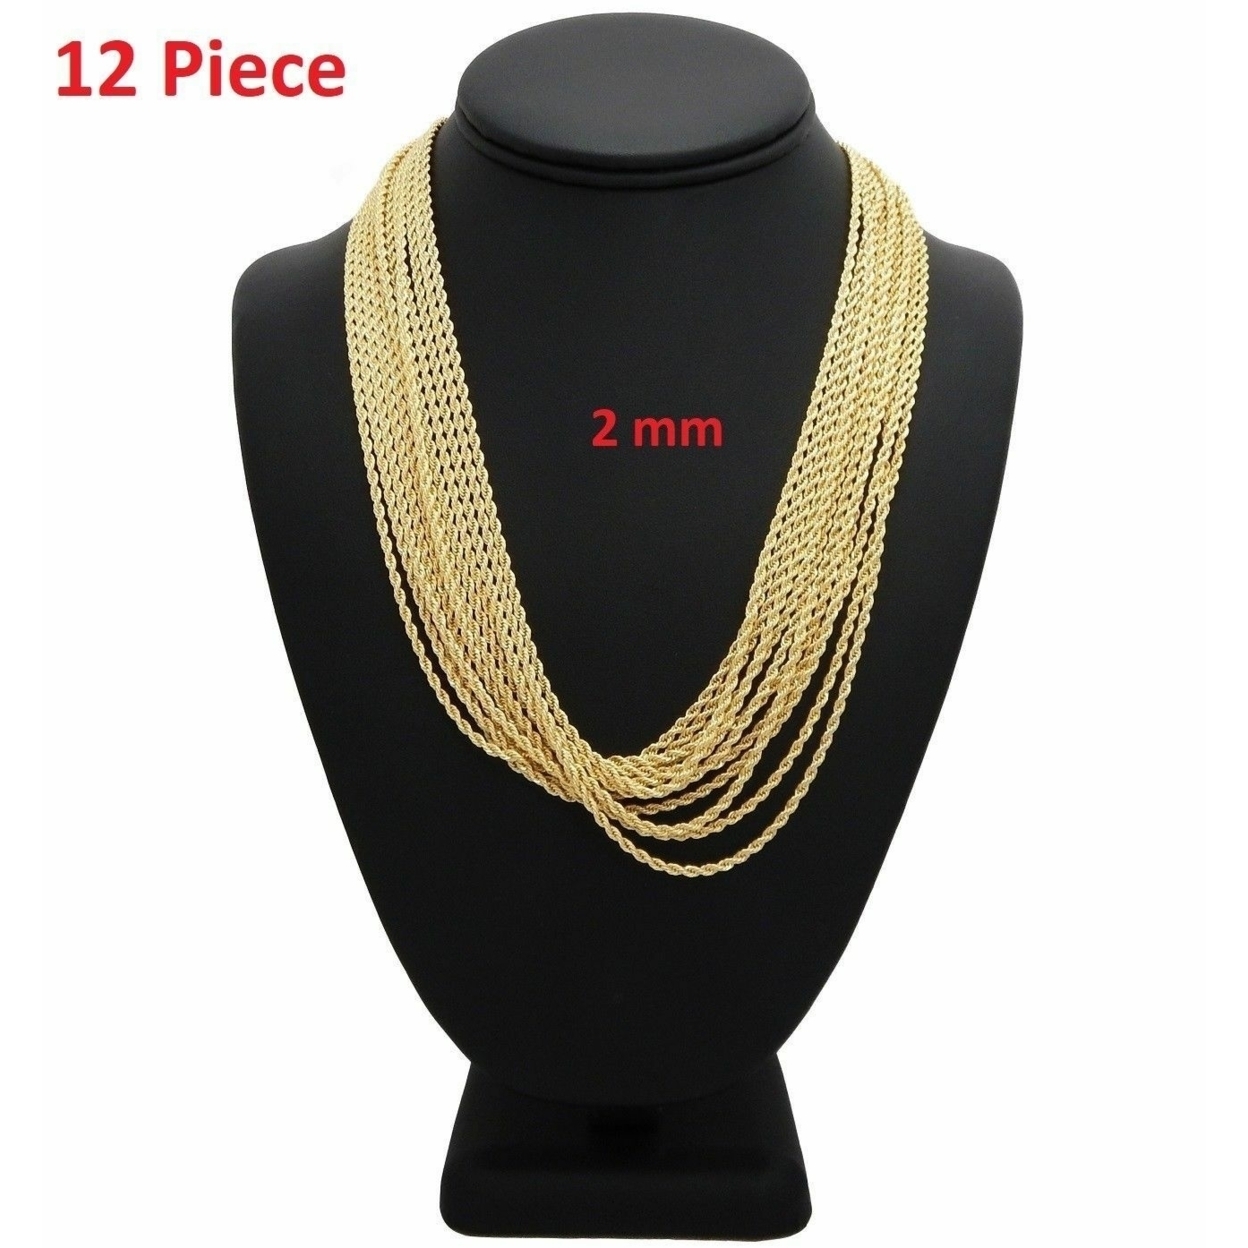 12 Piece Italy Rope Chain Necklace 2mm 24&quot; inch 14k Gold Plated Wholesale Lots | eBay